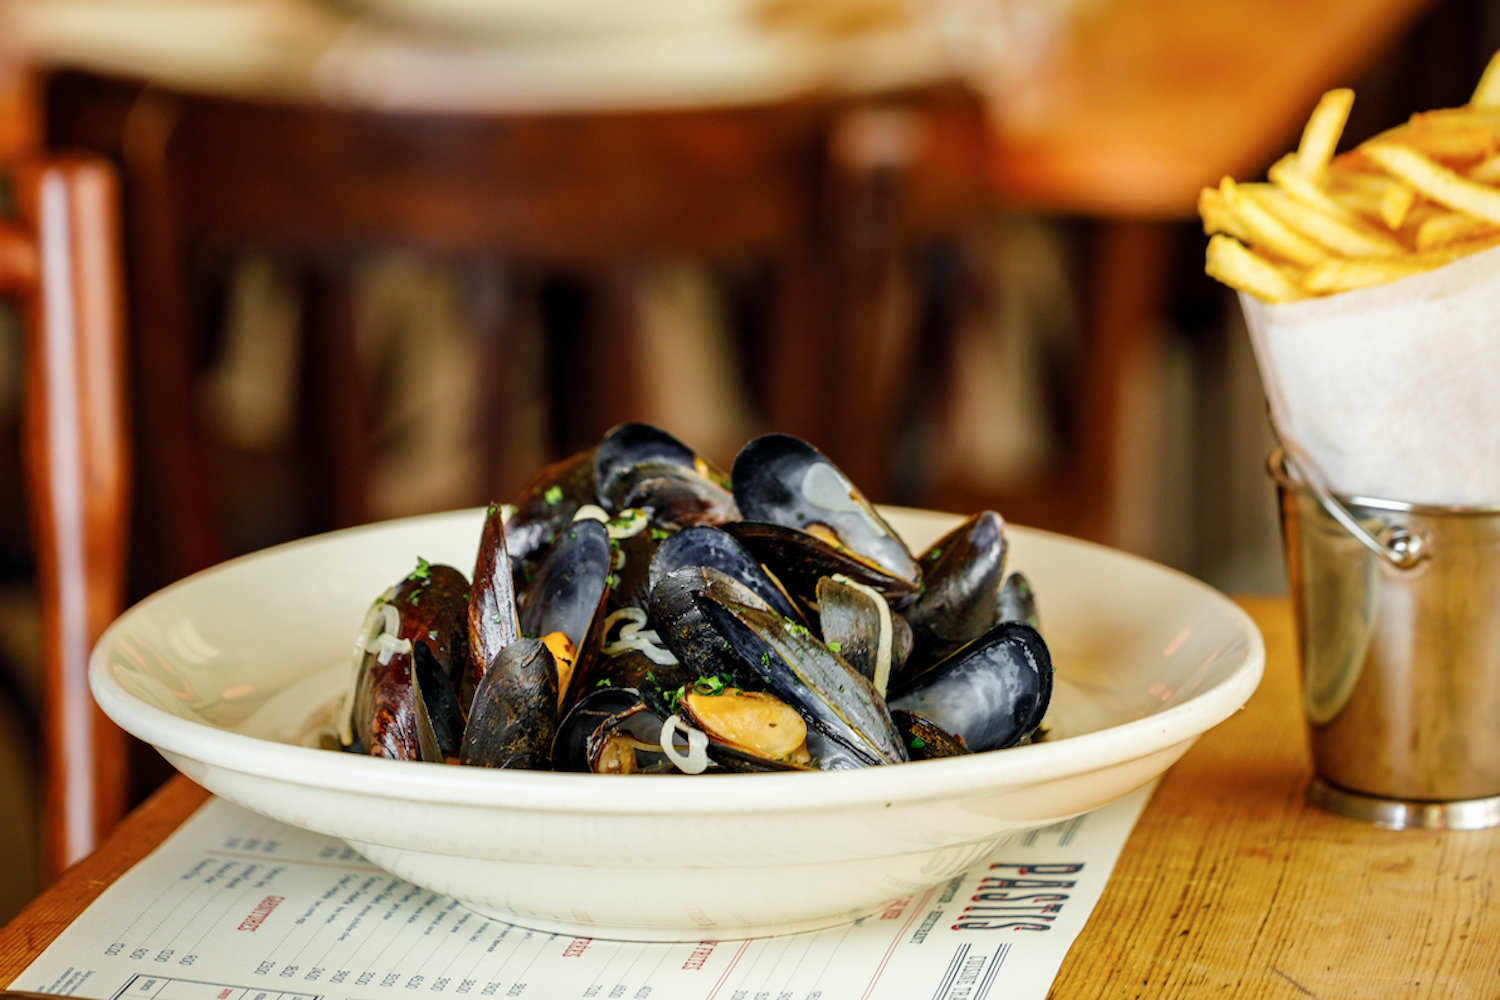 mussels in a bowl with a side of fries